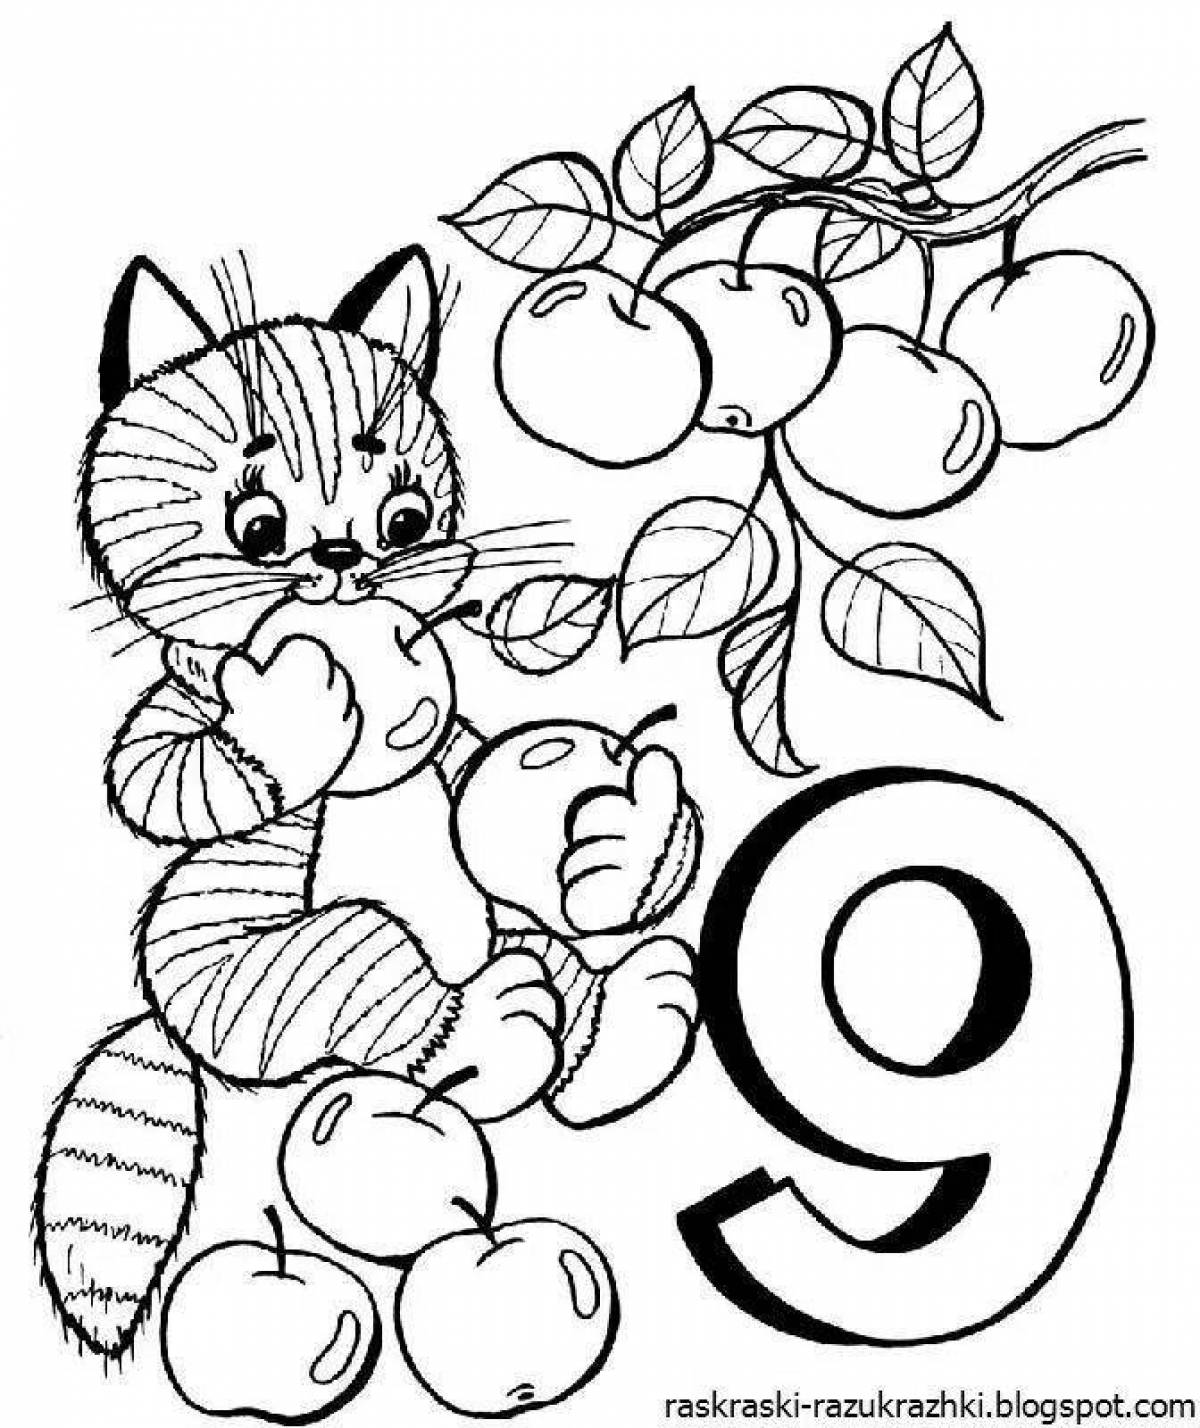 Entertaining coloring book for children 10 years old